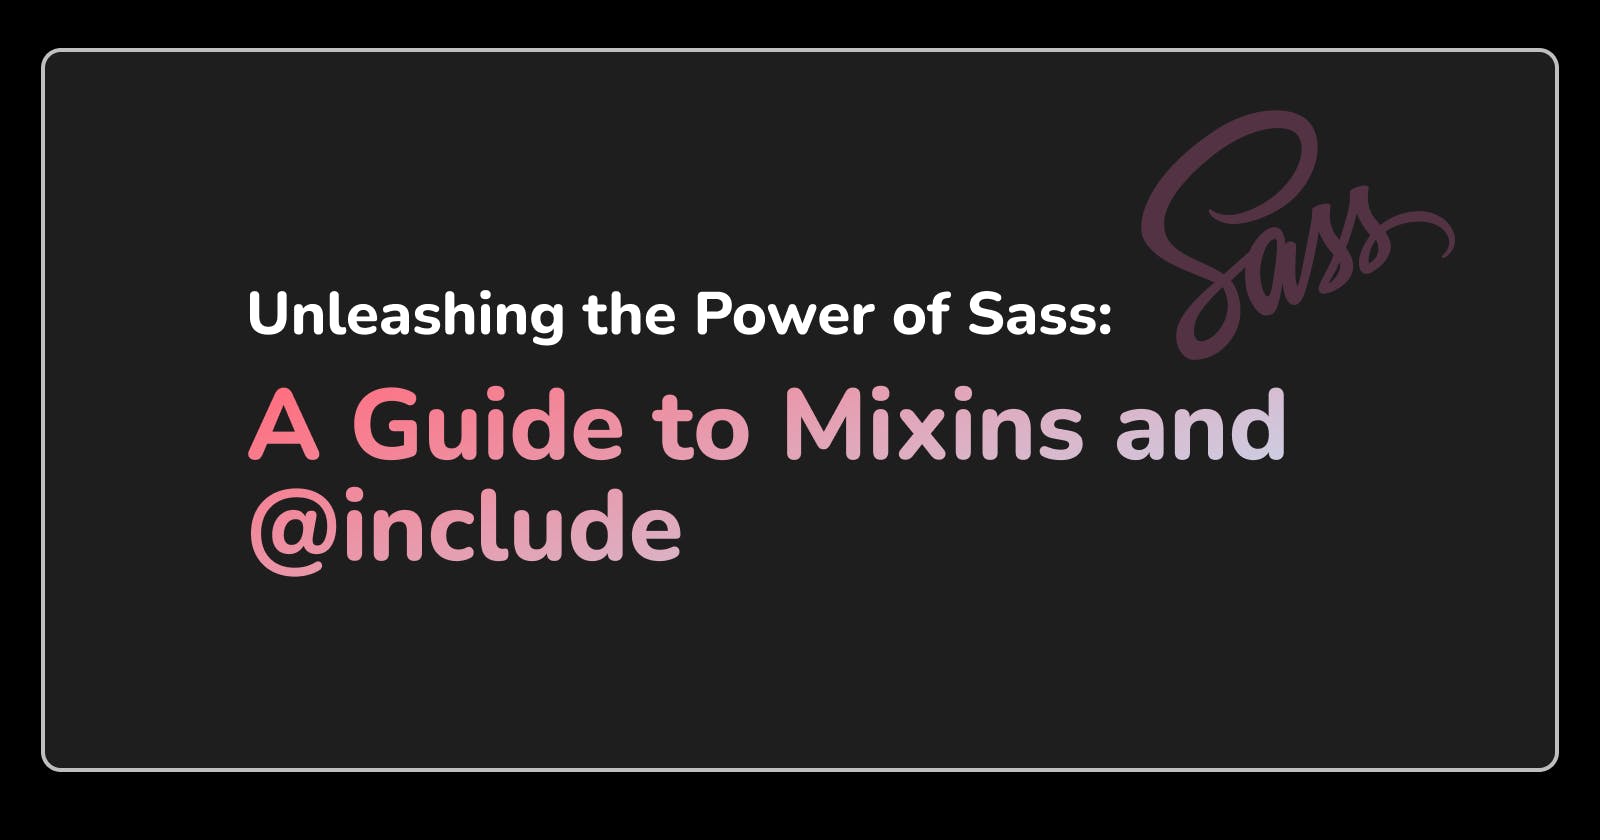 Unleashing the Power of Sass: A Guide to Mixins and @include